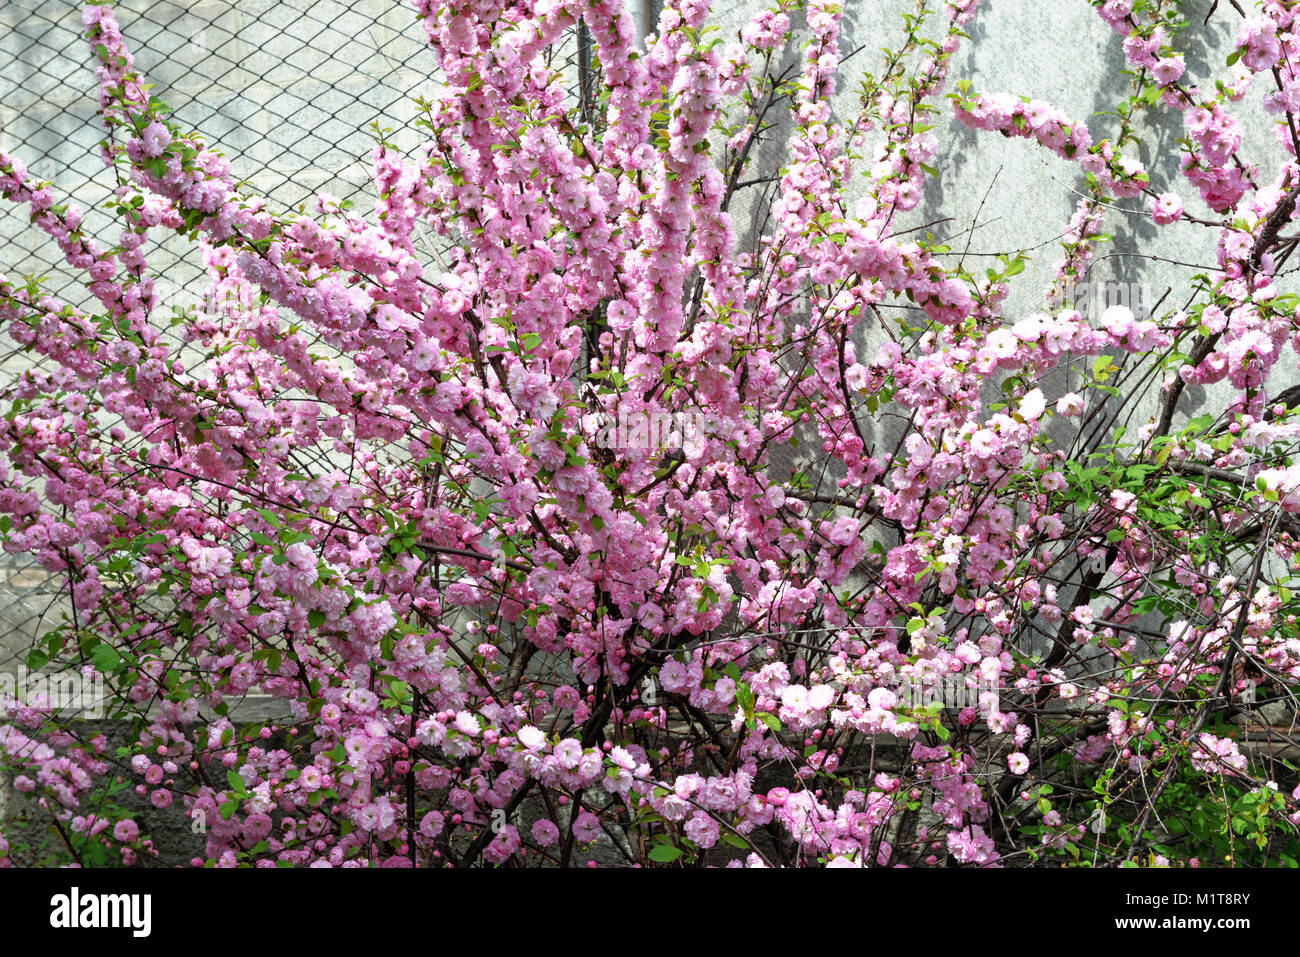 Many bright pink flowers are on plentifully flowering bush of Prunus triloba in spring sunlight. Stock Photo